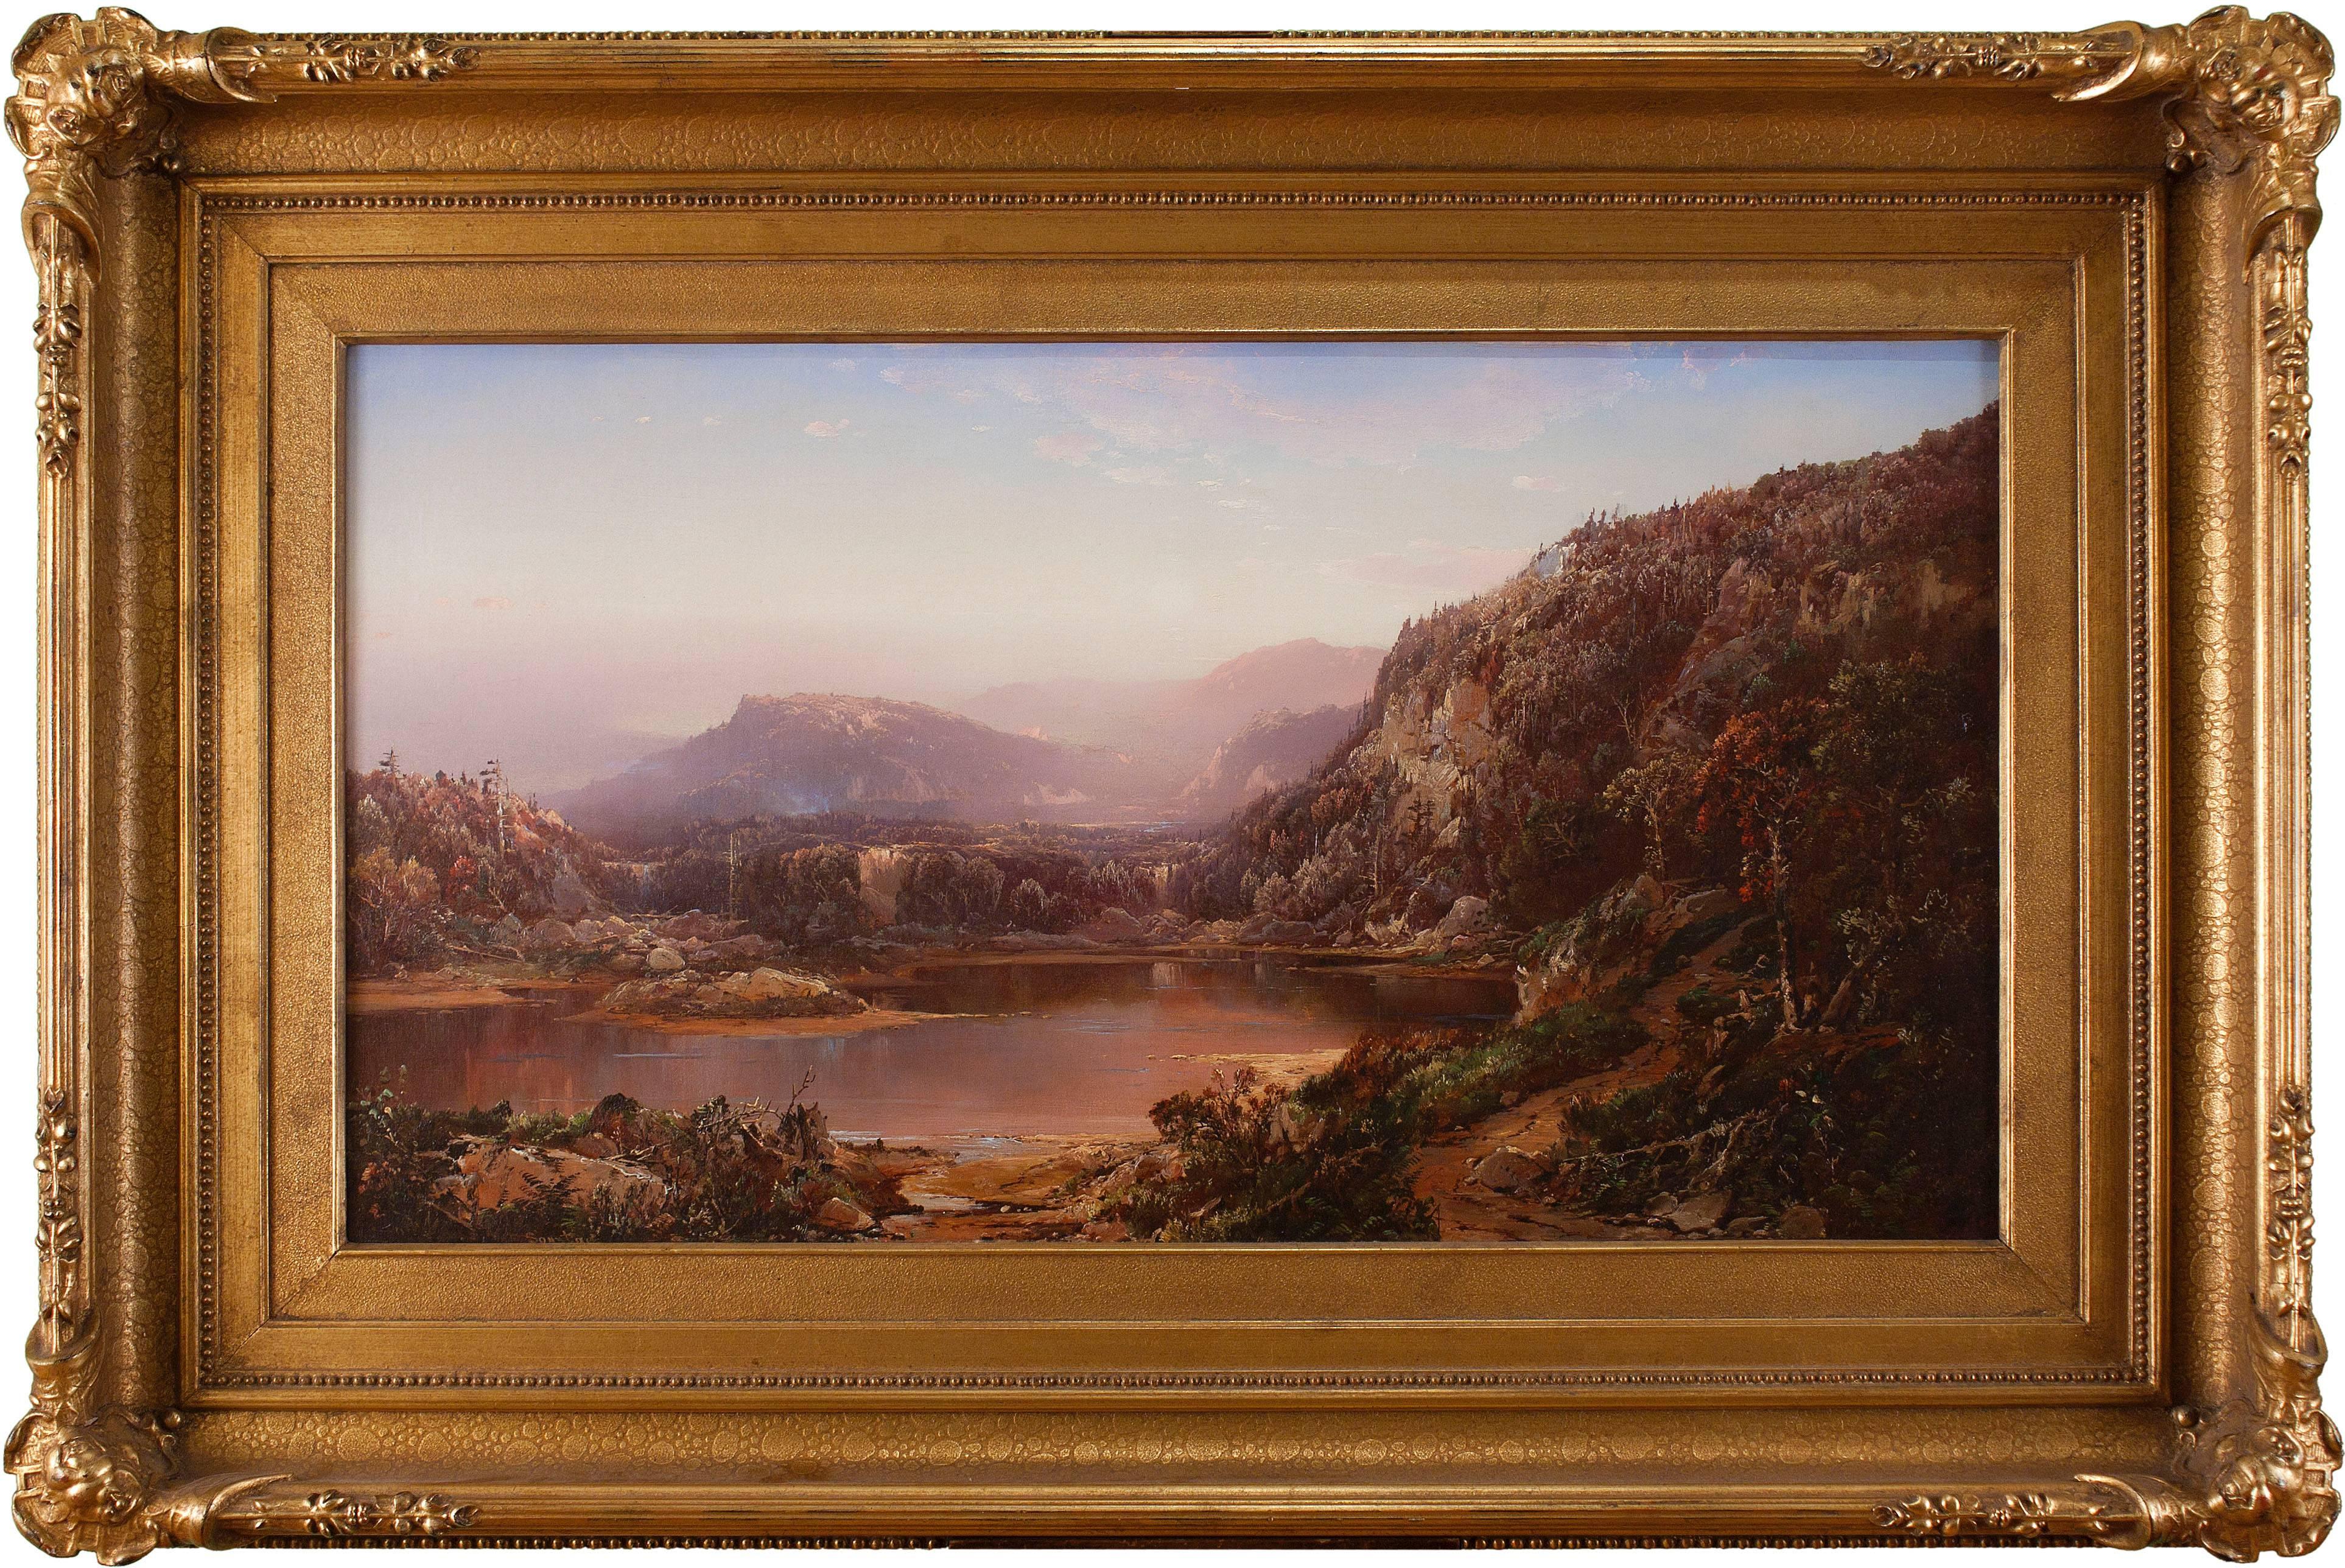 William Louis Sonntag (1822-1900), October in New Hampshire, near the foot of Mt. Washington, oil on canvas, Dimensions: 20 x 36 inches, actual; 32 1/2 x 48 1/2 inches, framed in a gilt frame Signed lower left: Sonntag Inscribed on verso: October in